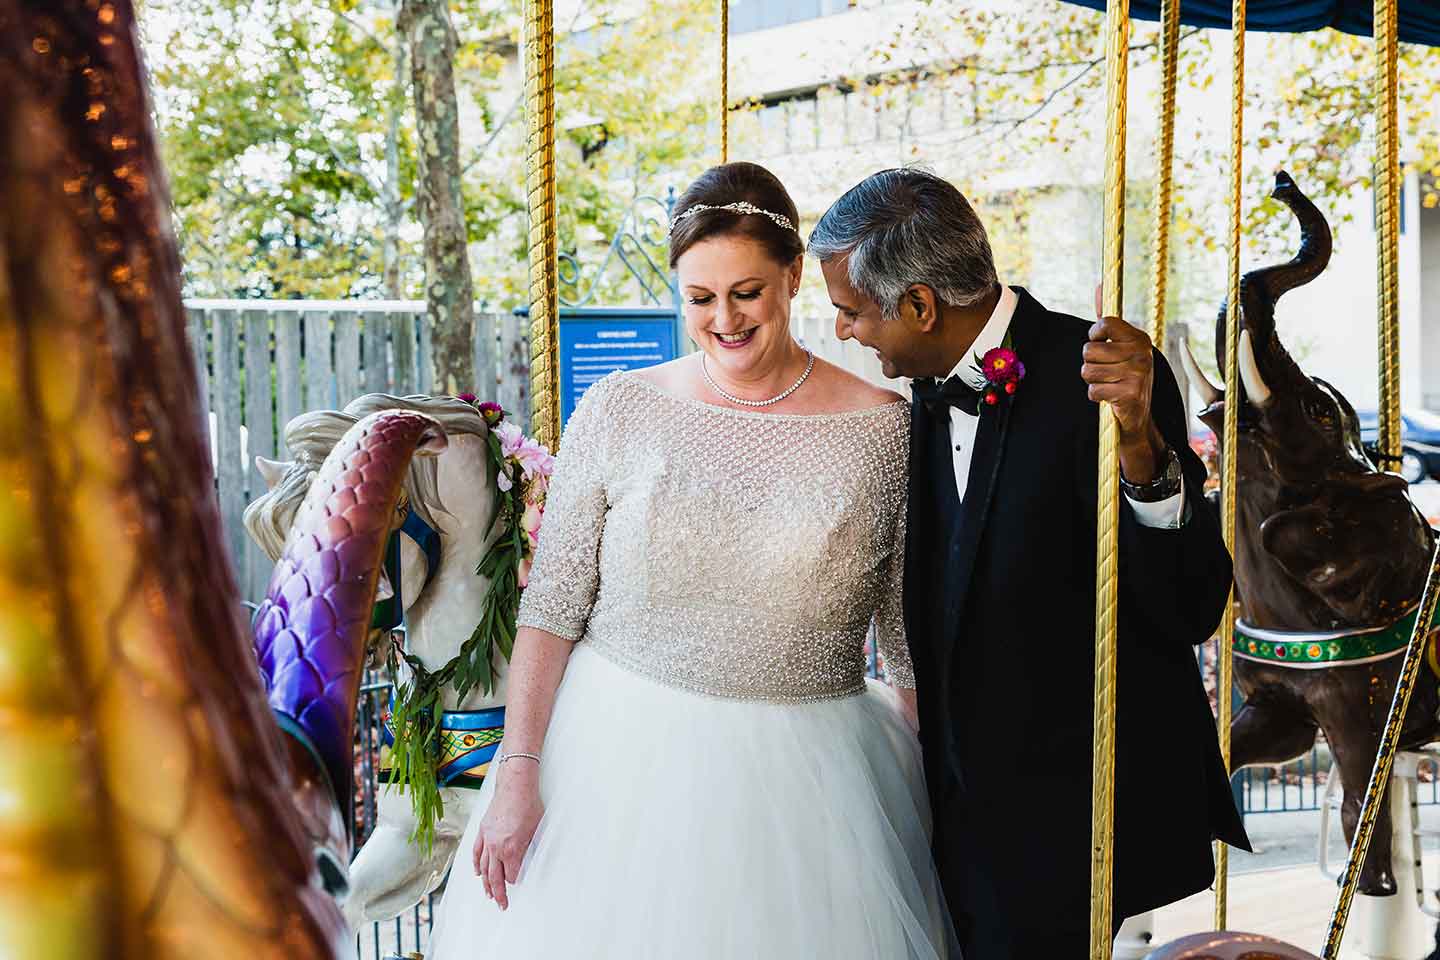 bride and groom laughing together on the merry go round carousel